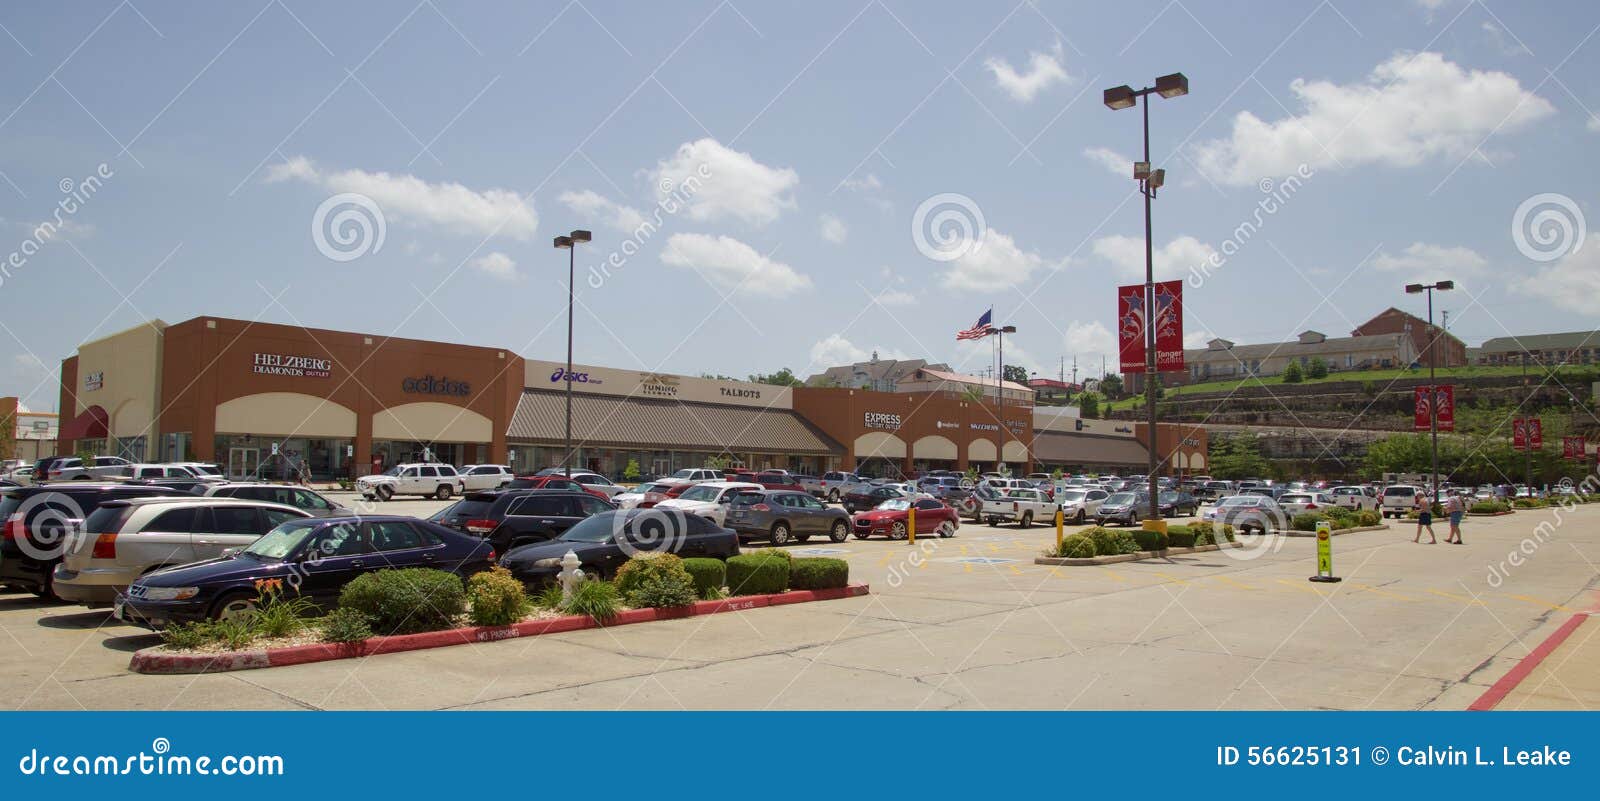 Tanger Outlet Strip Mall In Branson, Missouri Editorial Photo - Image of accessories, missouri ...